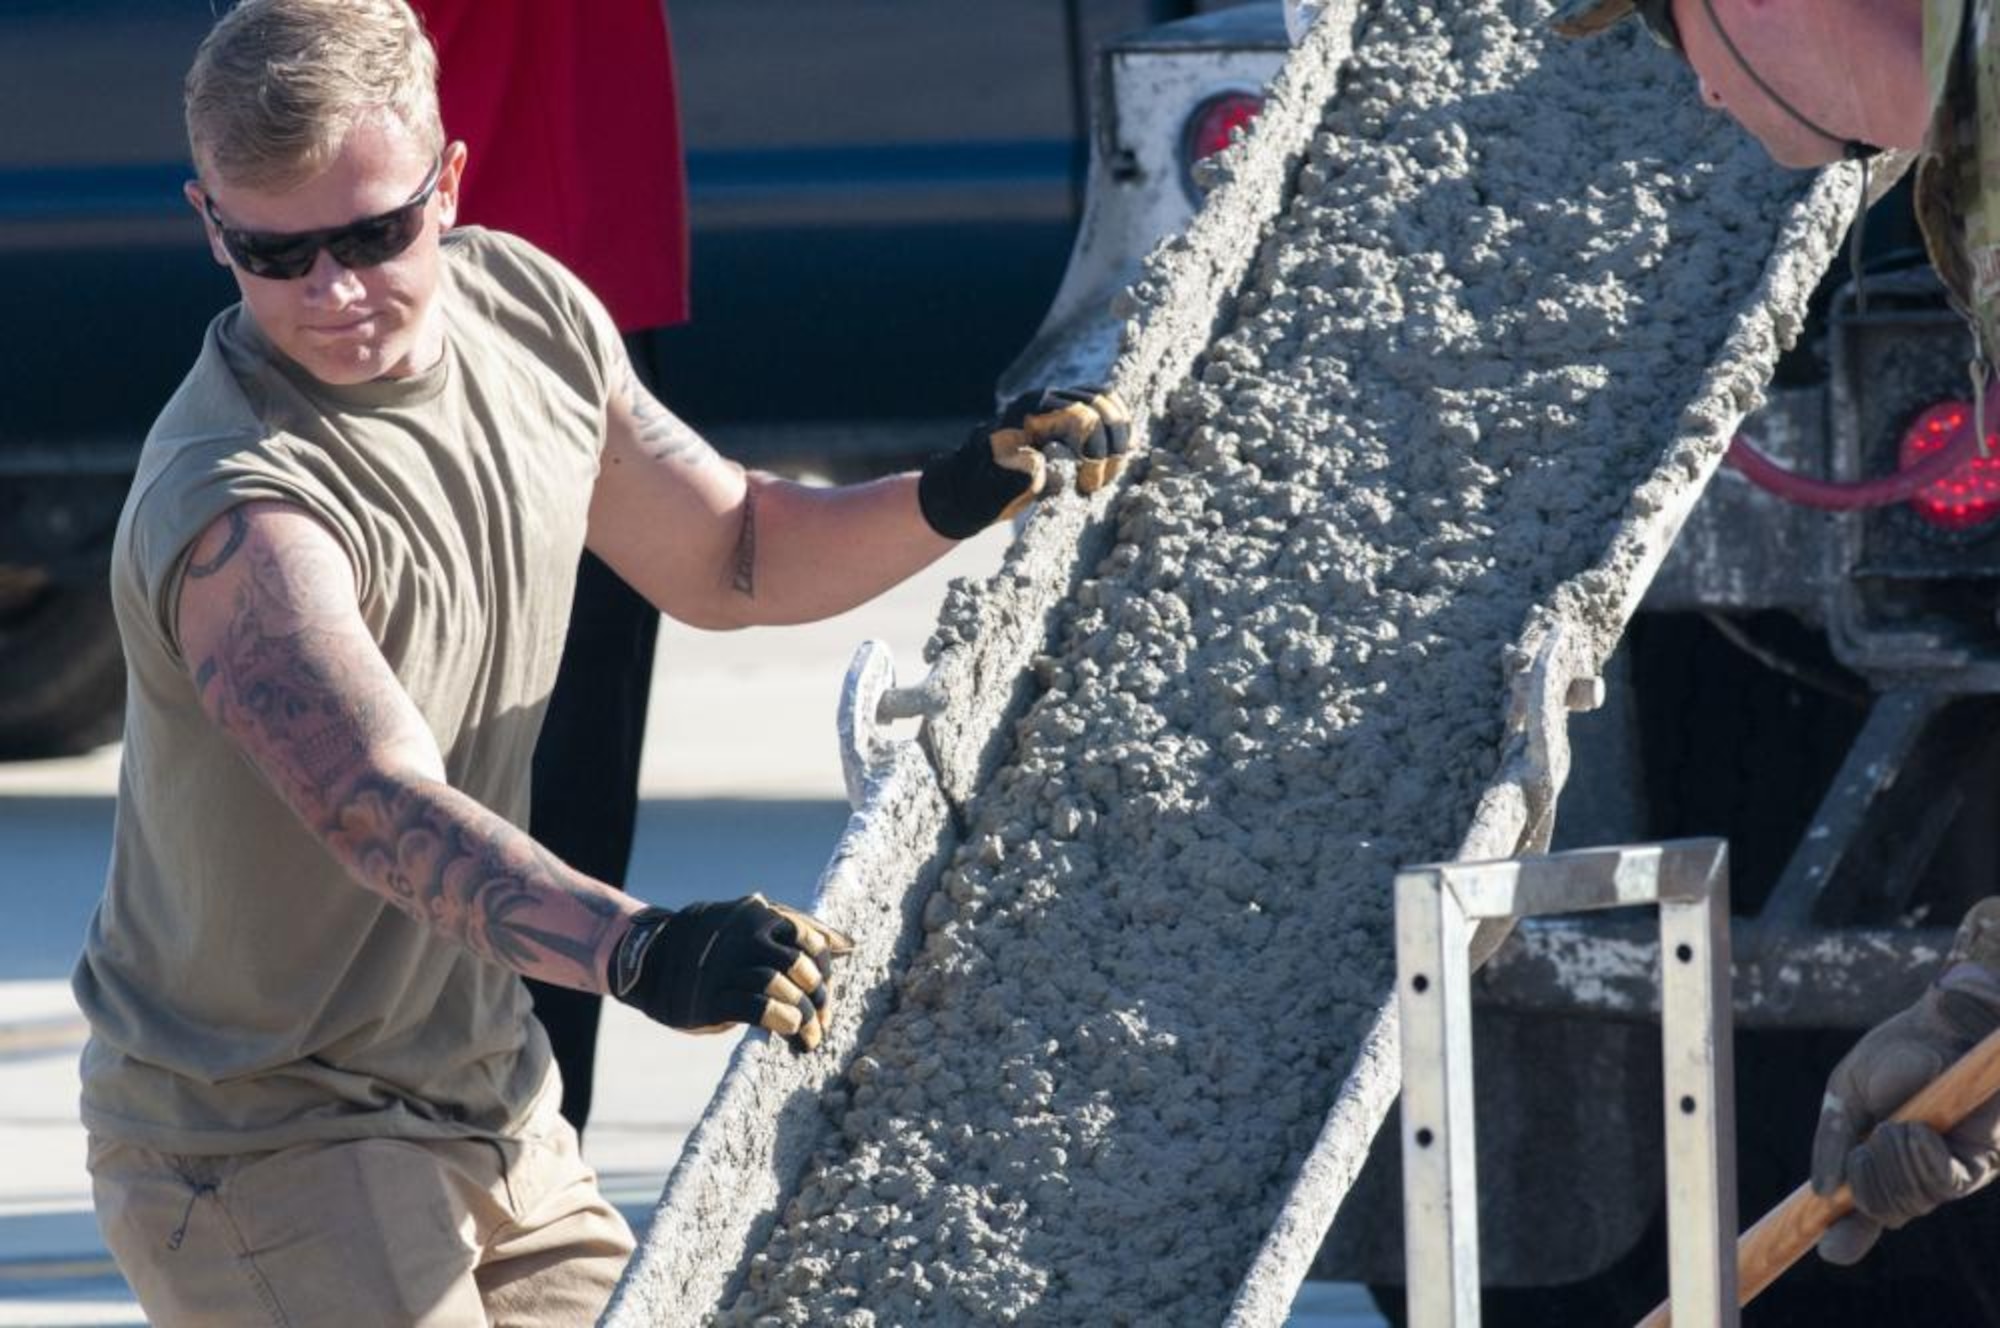 A U.S. Air Force Airman assigned to the 202nd RED HORSE Squadron, Florida Air National Guard, guides a chute as concrete fills a concrete slab on the airfield ramp at Naval Air Station Jacksonville, Florida, Feb. 8, 2023. The 202nd RHS Airmen are rehabbing the airfield to ensure taxiway concrete can withstand the weight of the U.S. Navy's P-8A Poseidon aircraft. (U.S. Air National Guard photo by Tech Sgt. Chelsea Smith)